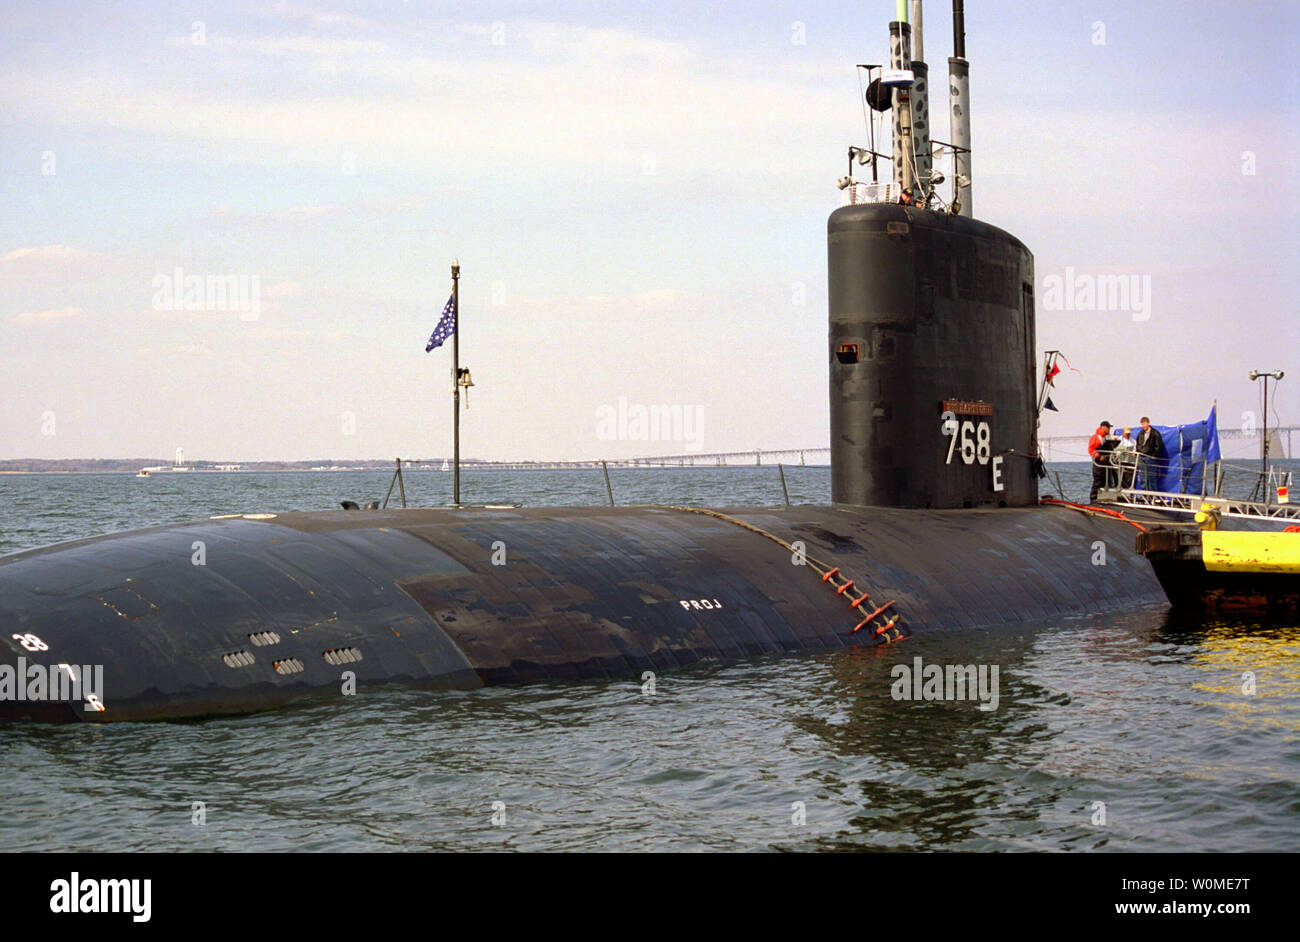 The nuclear-powered USS Hartford submarine is seen in the Chesapeake Bay, Maryland on March 25, 1999. The vessel collided with a transport dock ship, the USS New Orleans, in the Persian Gulf in the narrow Strait of Hormuz on March 20 ,2009. The collision caused a ruptured fuel tank on the New Orleans, resulting in a 25,000 gallon oil spill. (UPI Photo/Don S. Montgomery/U.S. Navy) Stock Photo